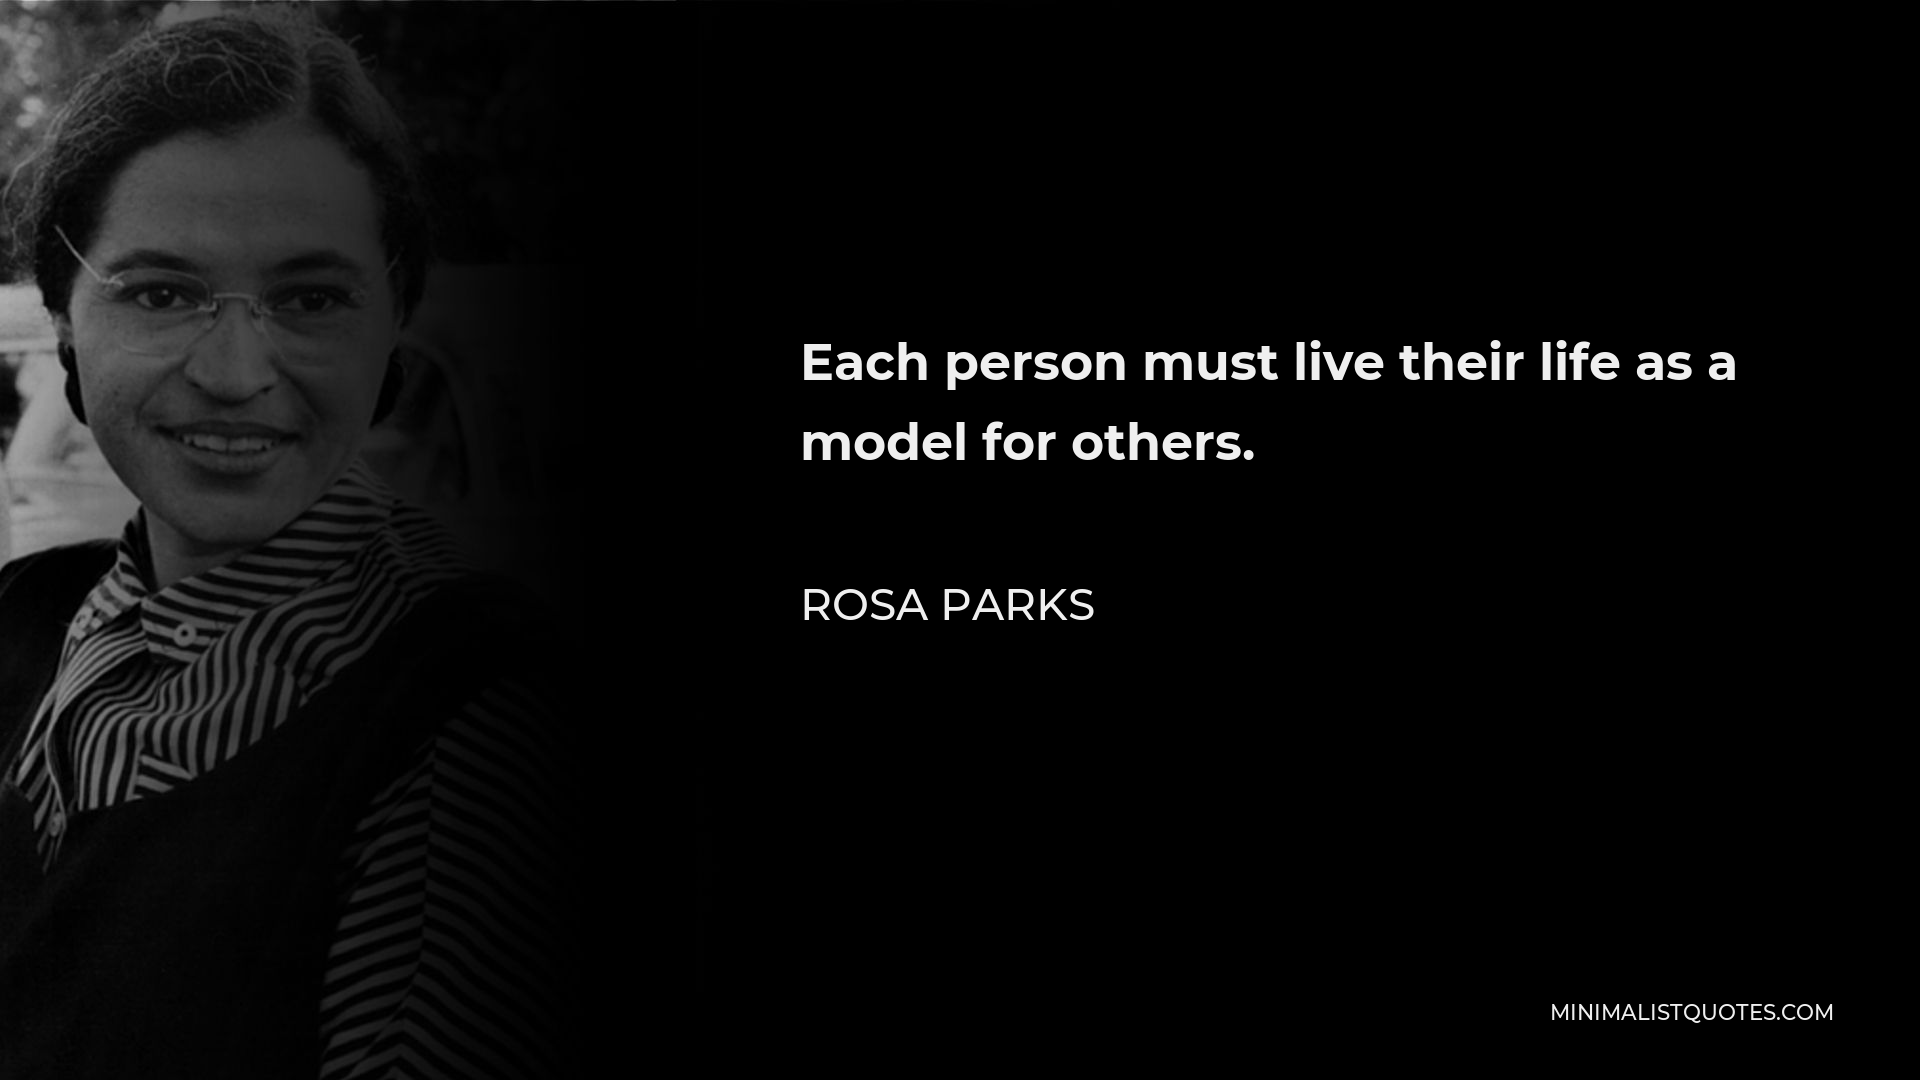 Rosa Parks Quote - Each person must live their life as a model for others.